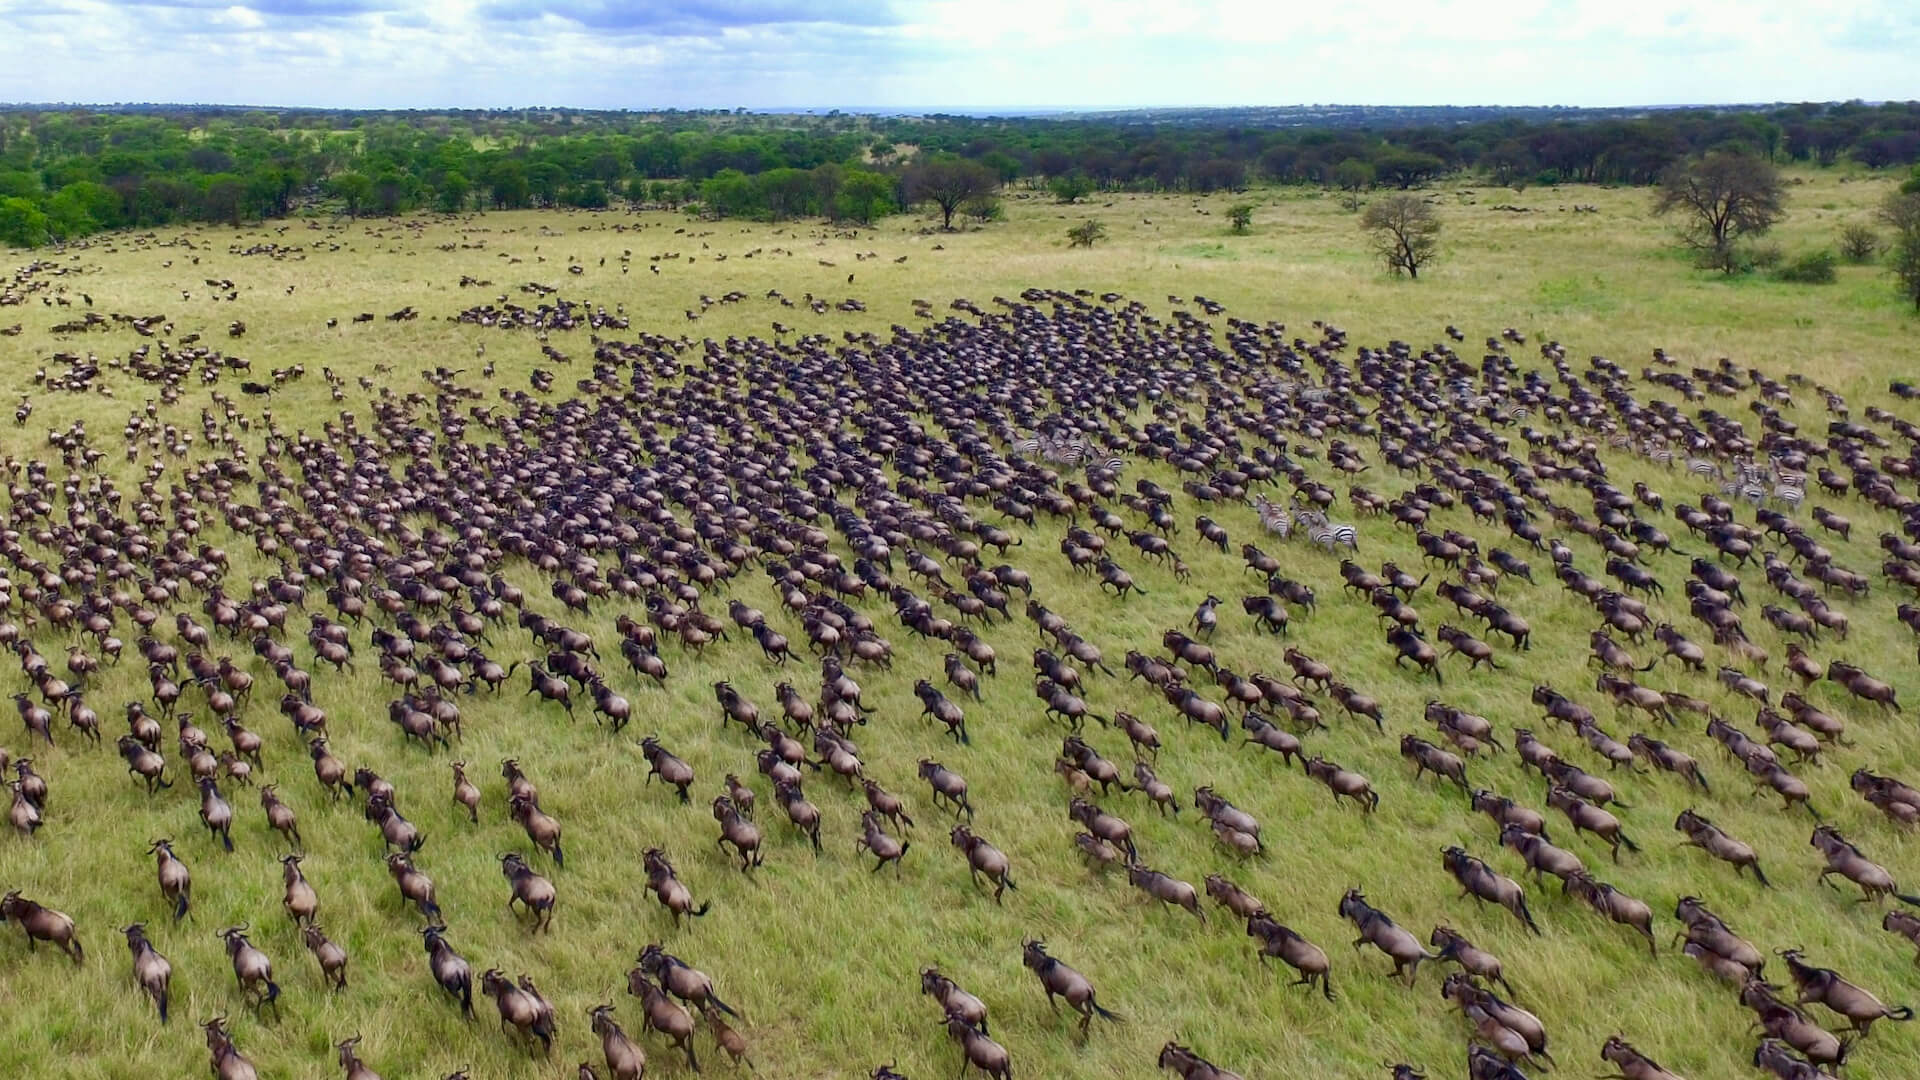 10 Reasons Why You Should See the Great Migration in Tanzania!